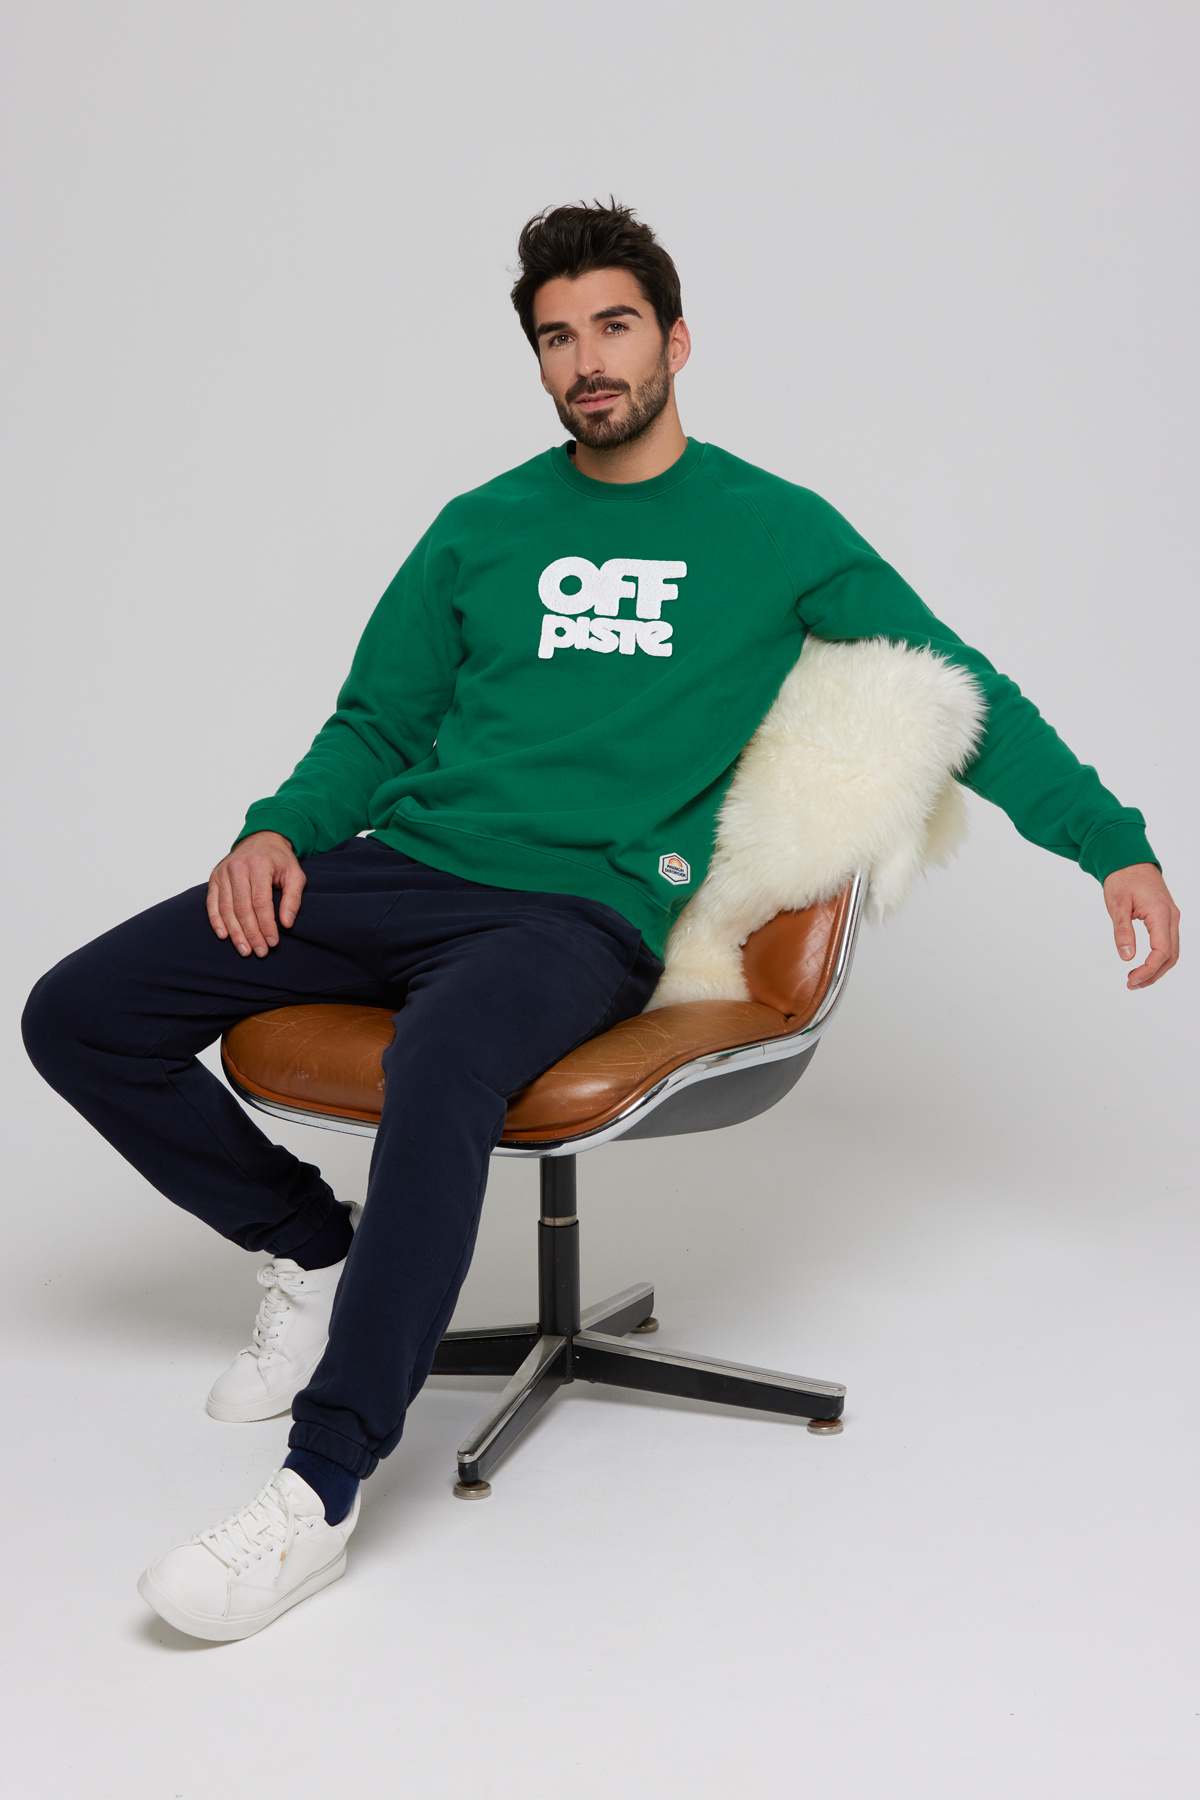 Sweat Clyde OFF PISTE (Broderie)